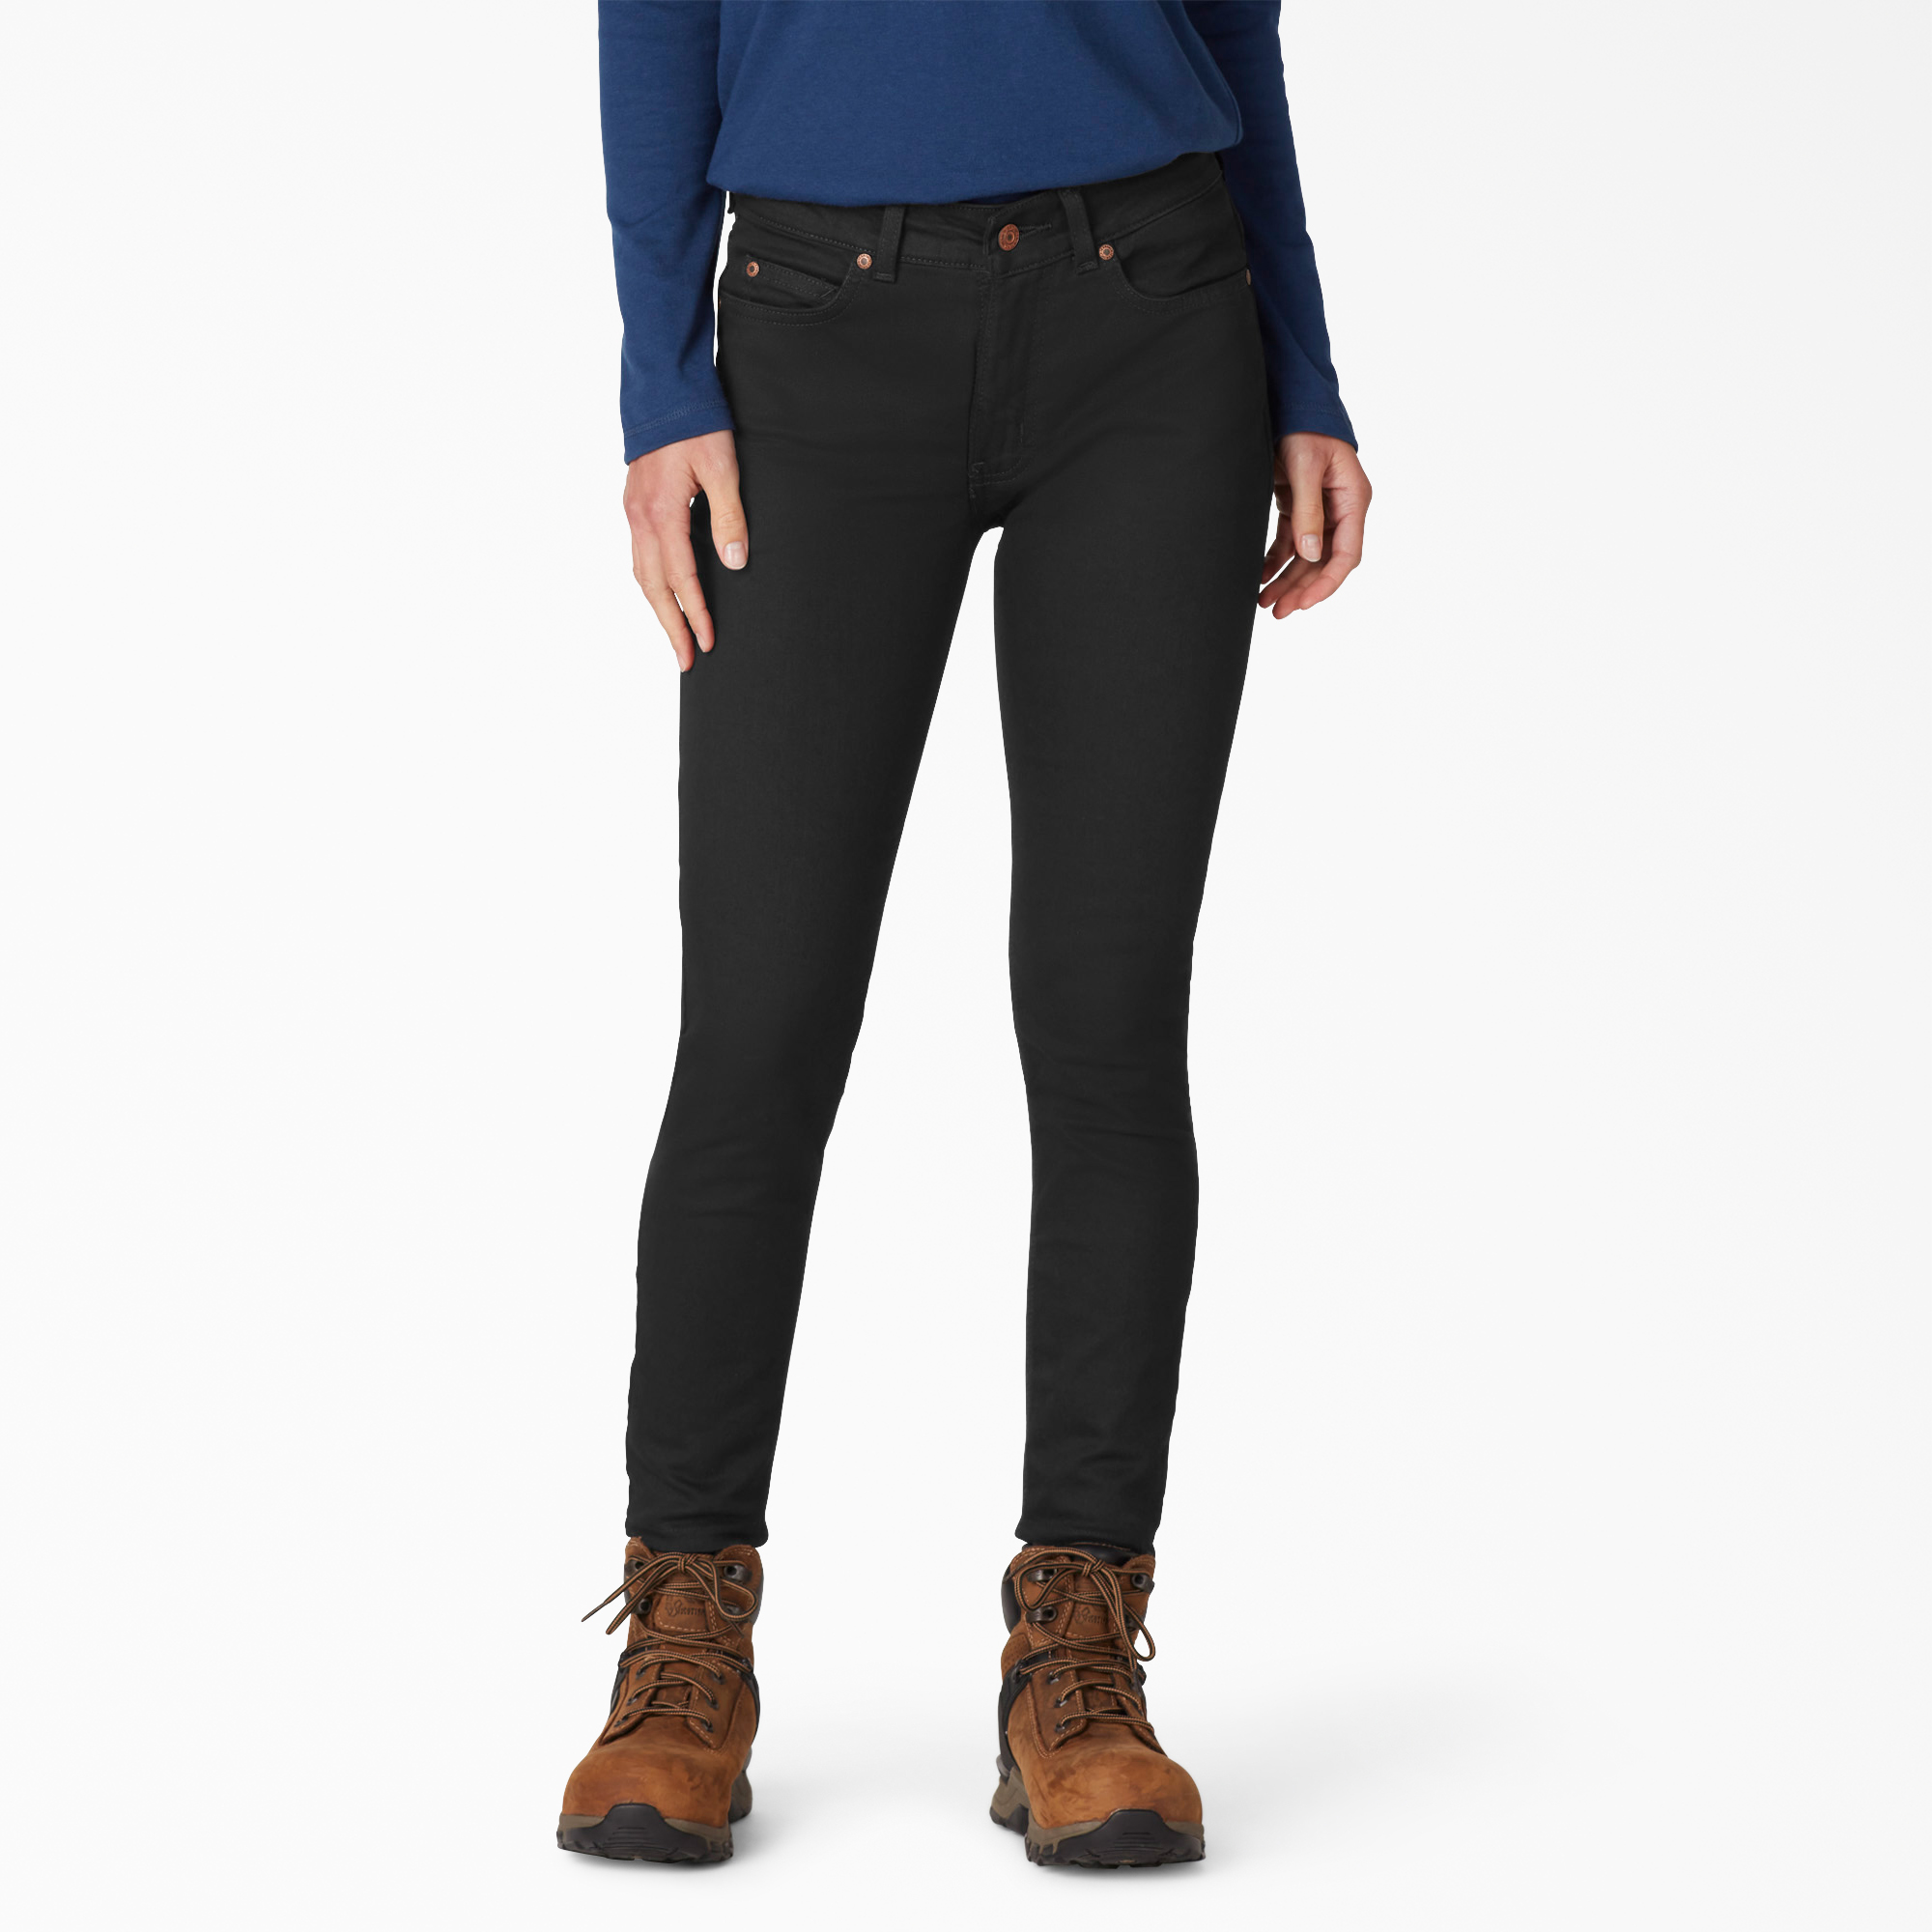 relaxed skinny black jeans